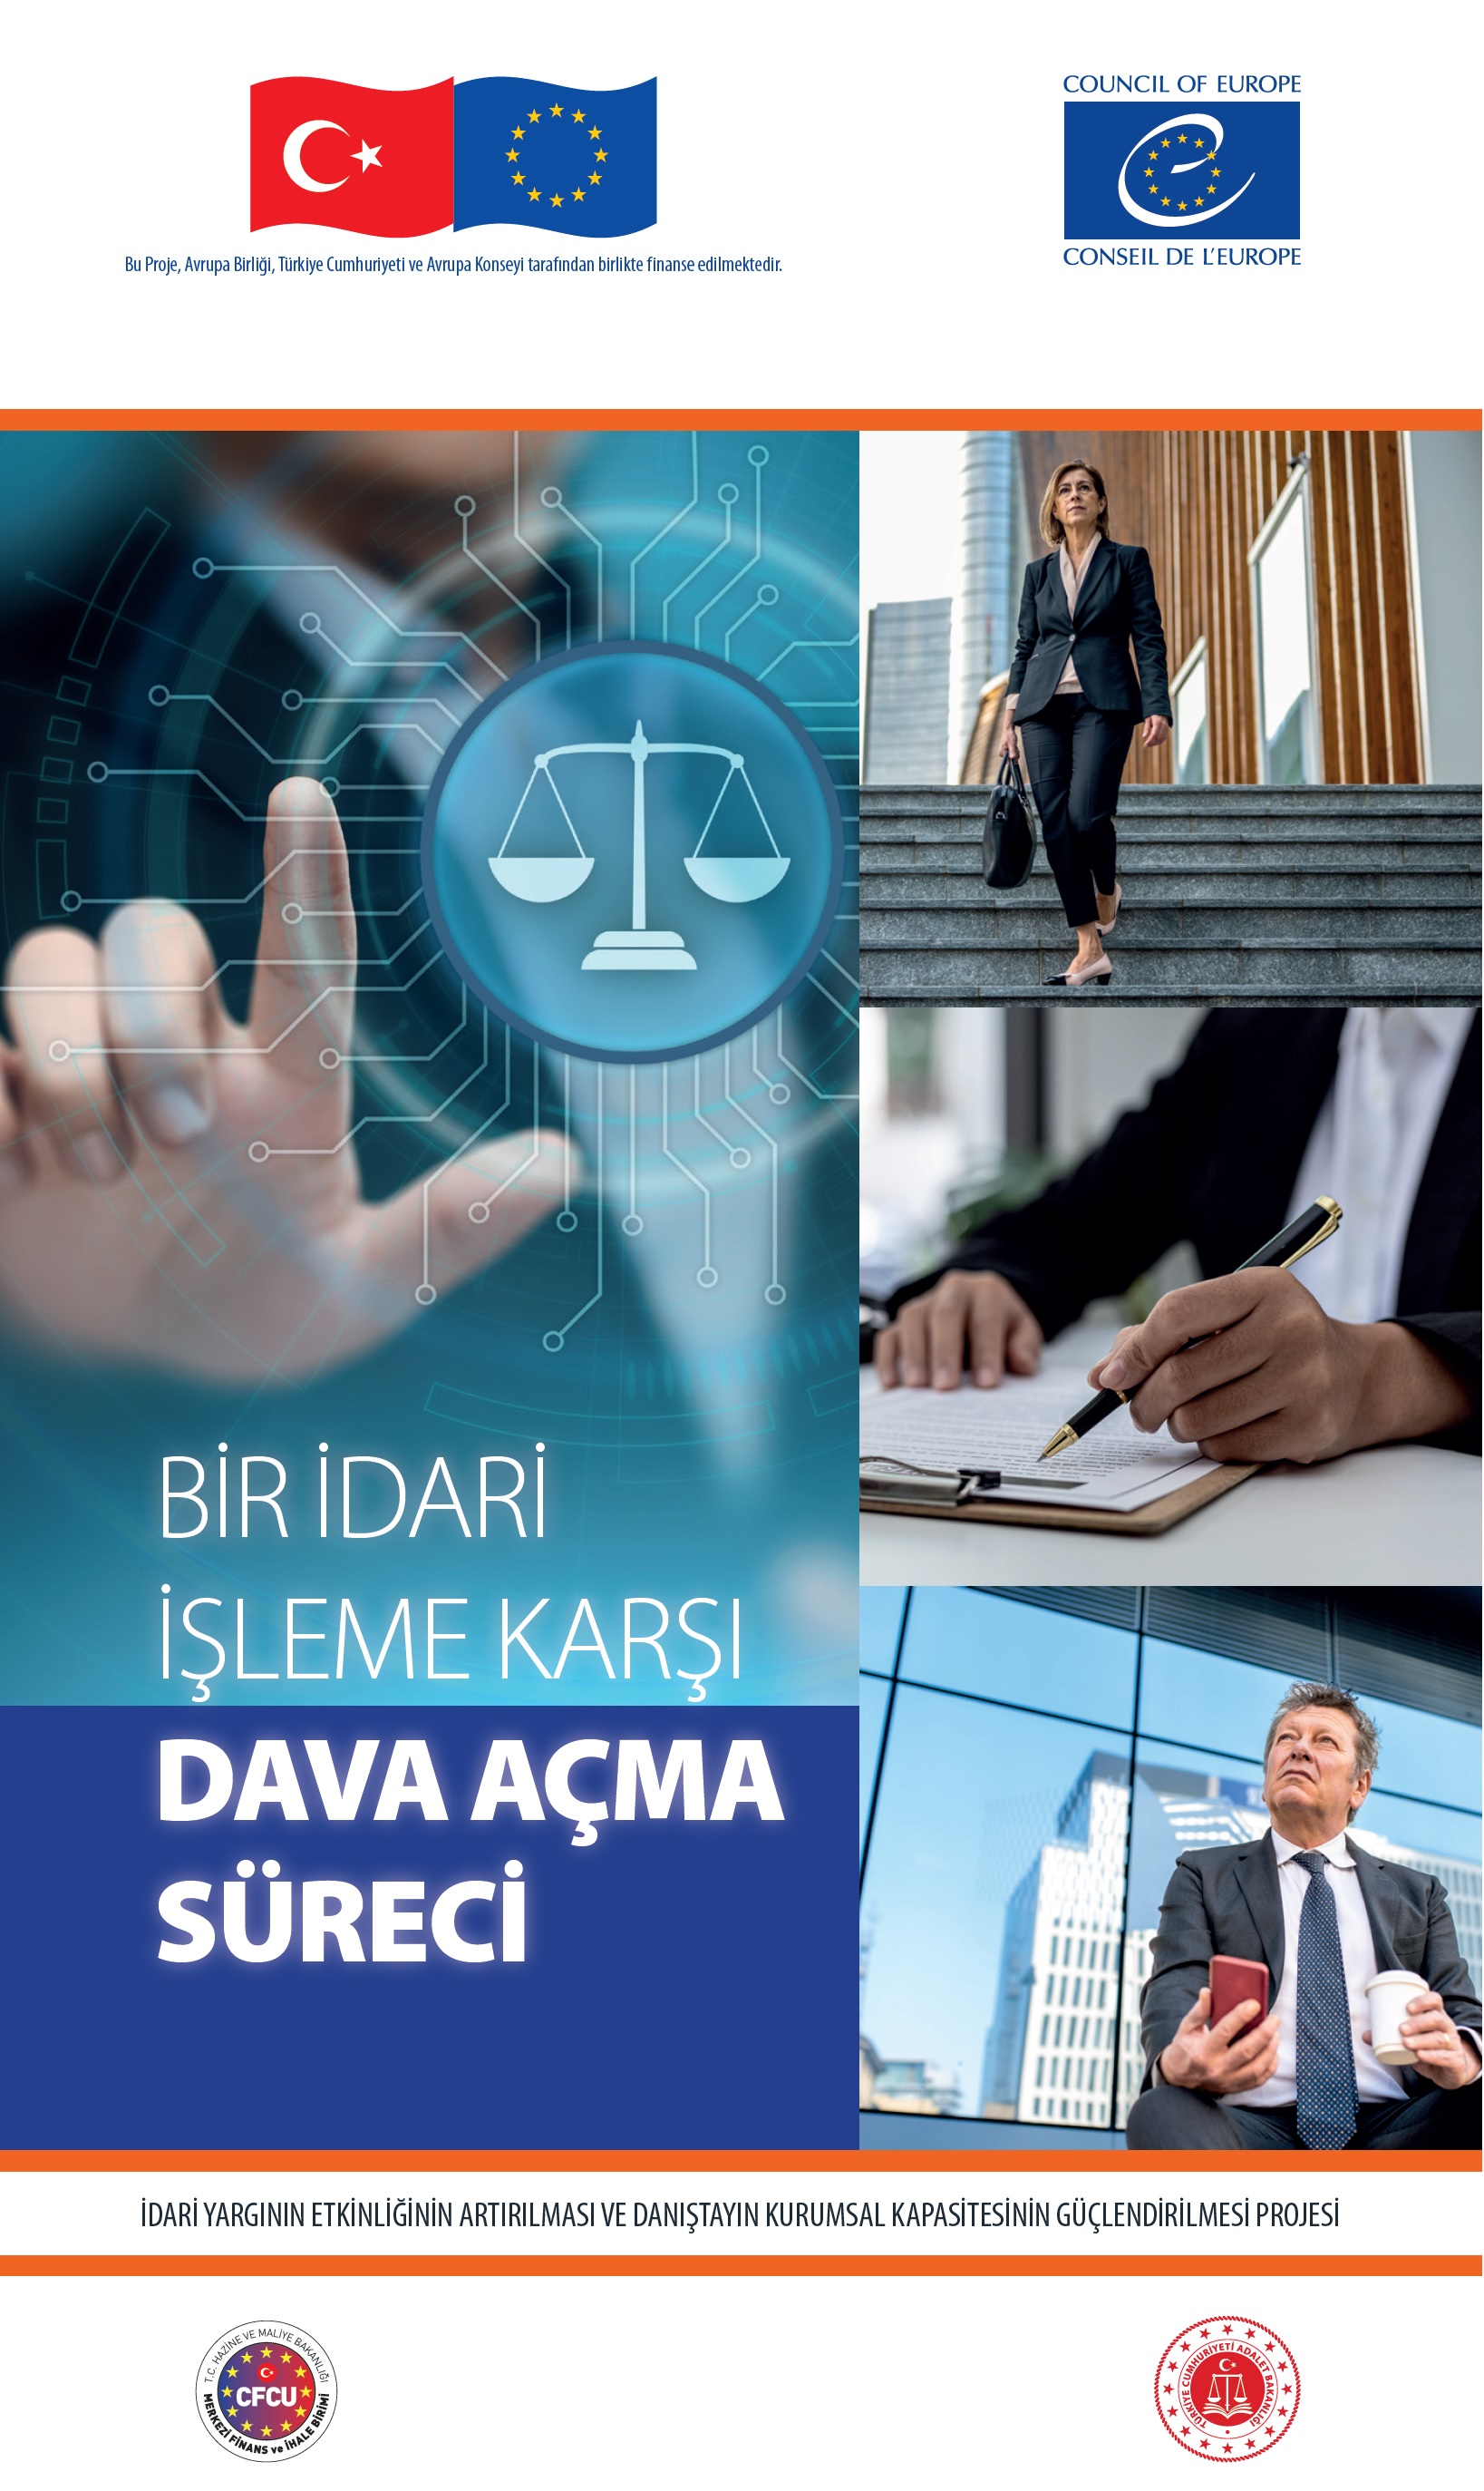 THE PROCESS OF FILING A LAWSUIT AGAINST AN ADMINISTRATIVE ACT (Turkish only)